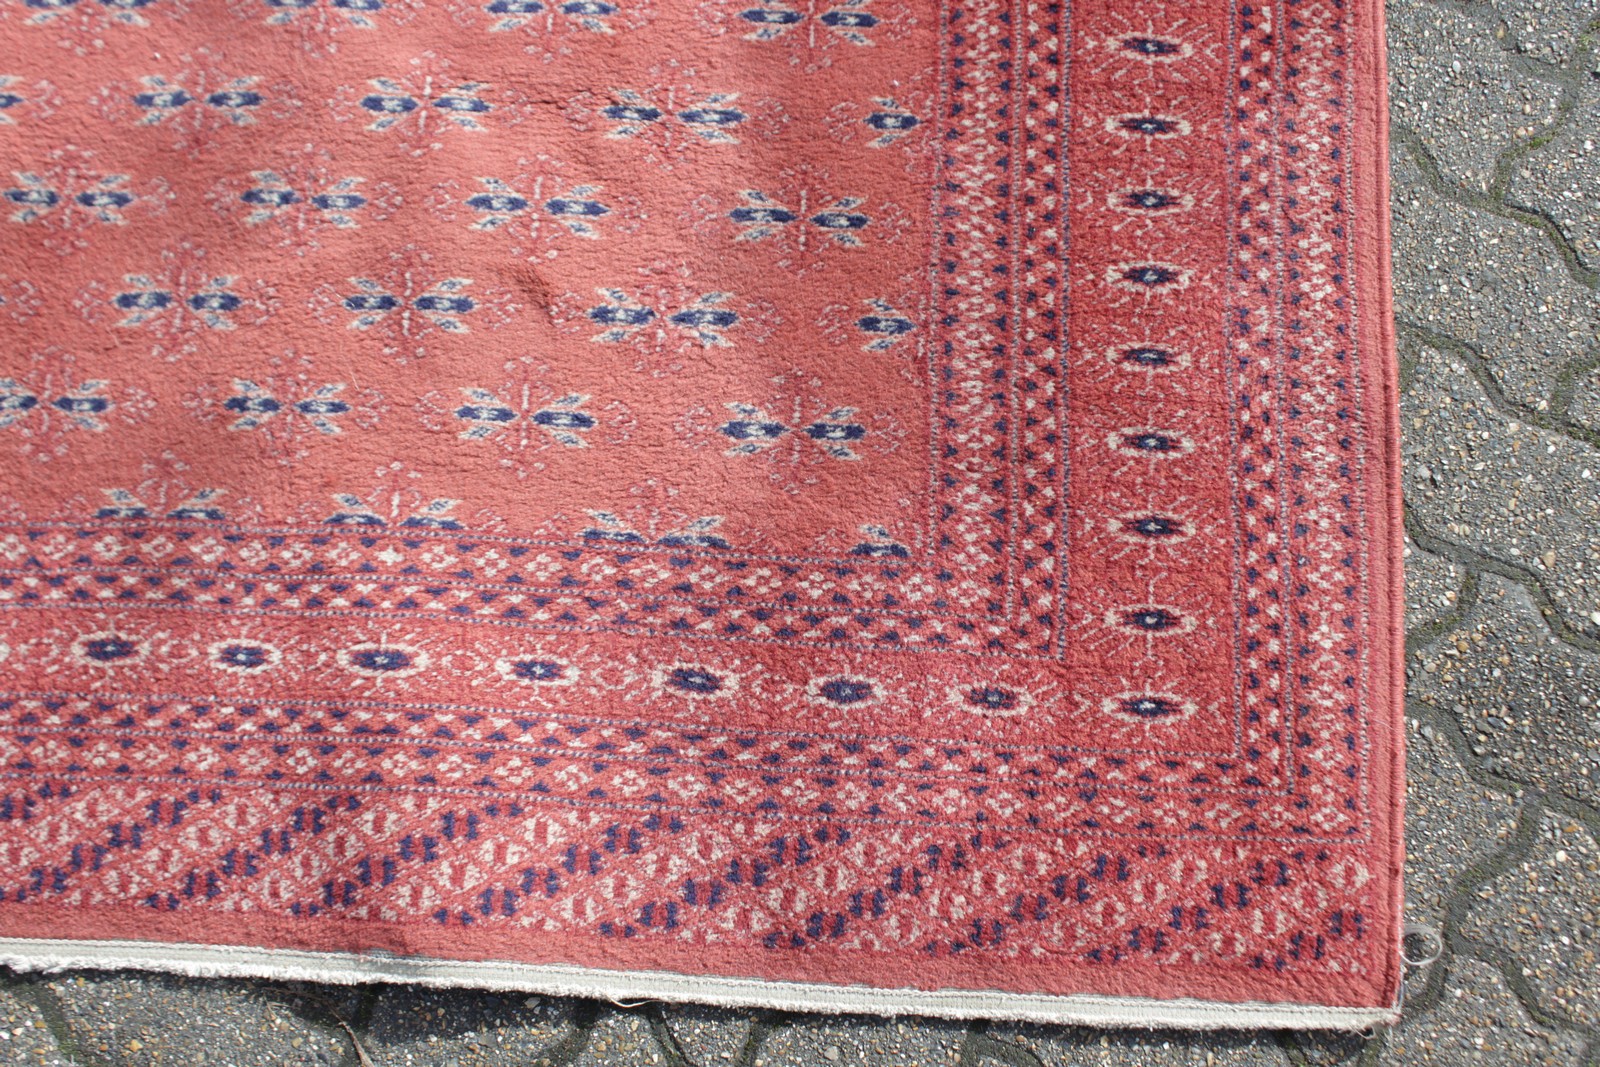 A PERSIAN WOOL CARPET, red ground, double border with central repeat pattern. 6ft x 4ft 3ins. - Image 3 of 4